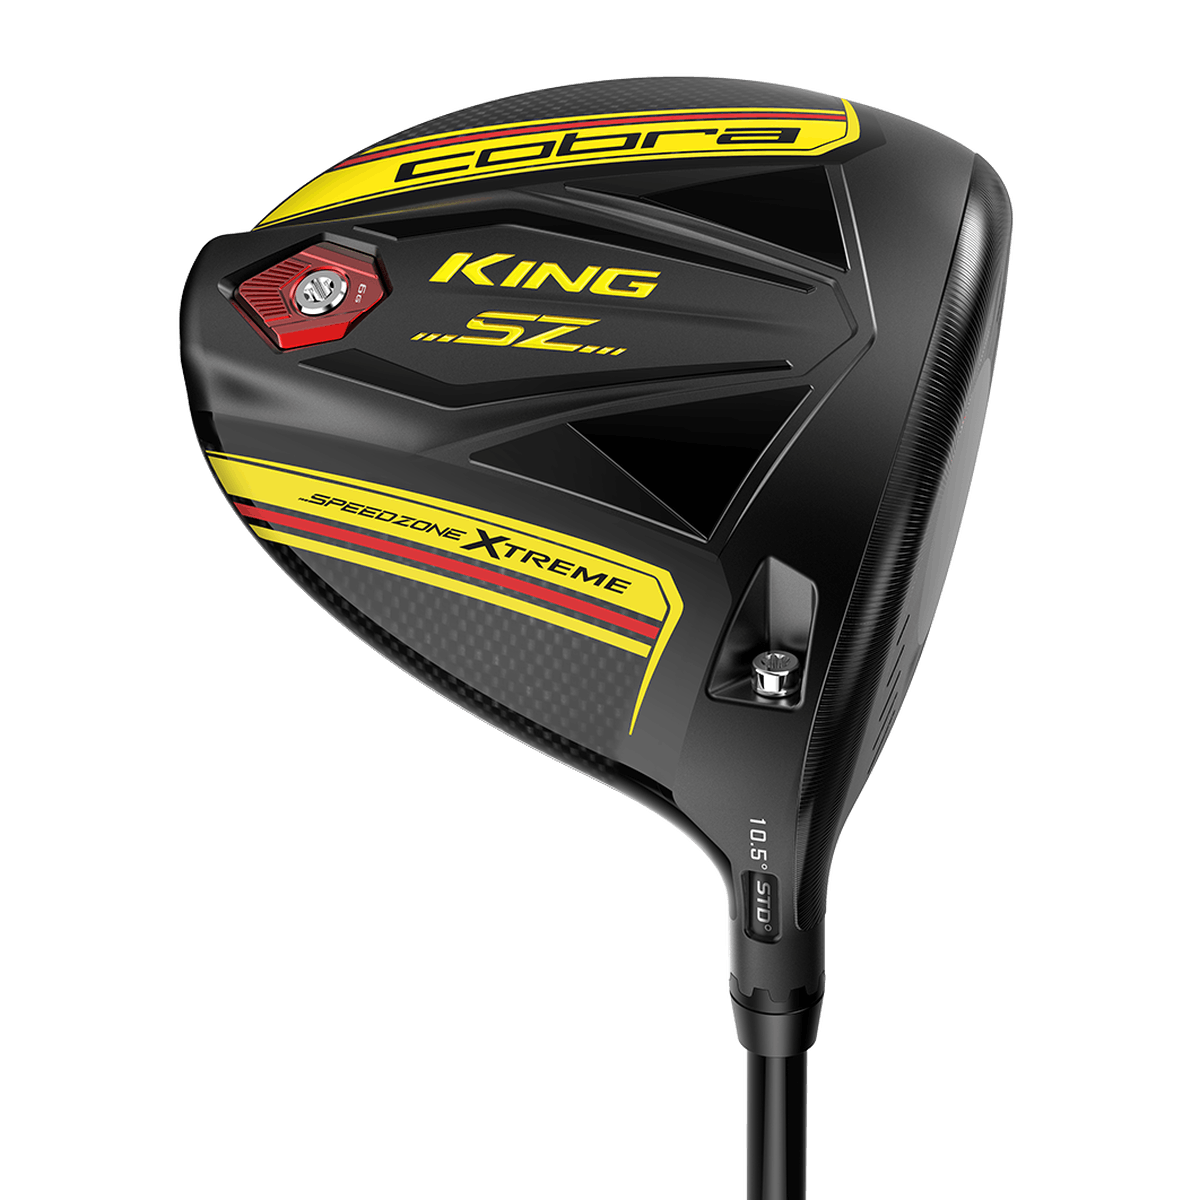 Expert Review: Cobra Speedzone Xtreme Pars and Stripes Edition 